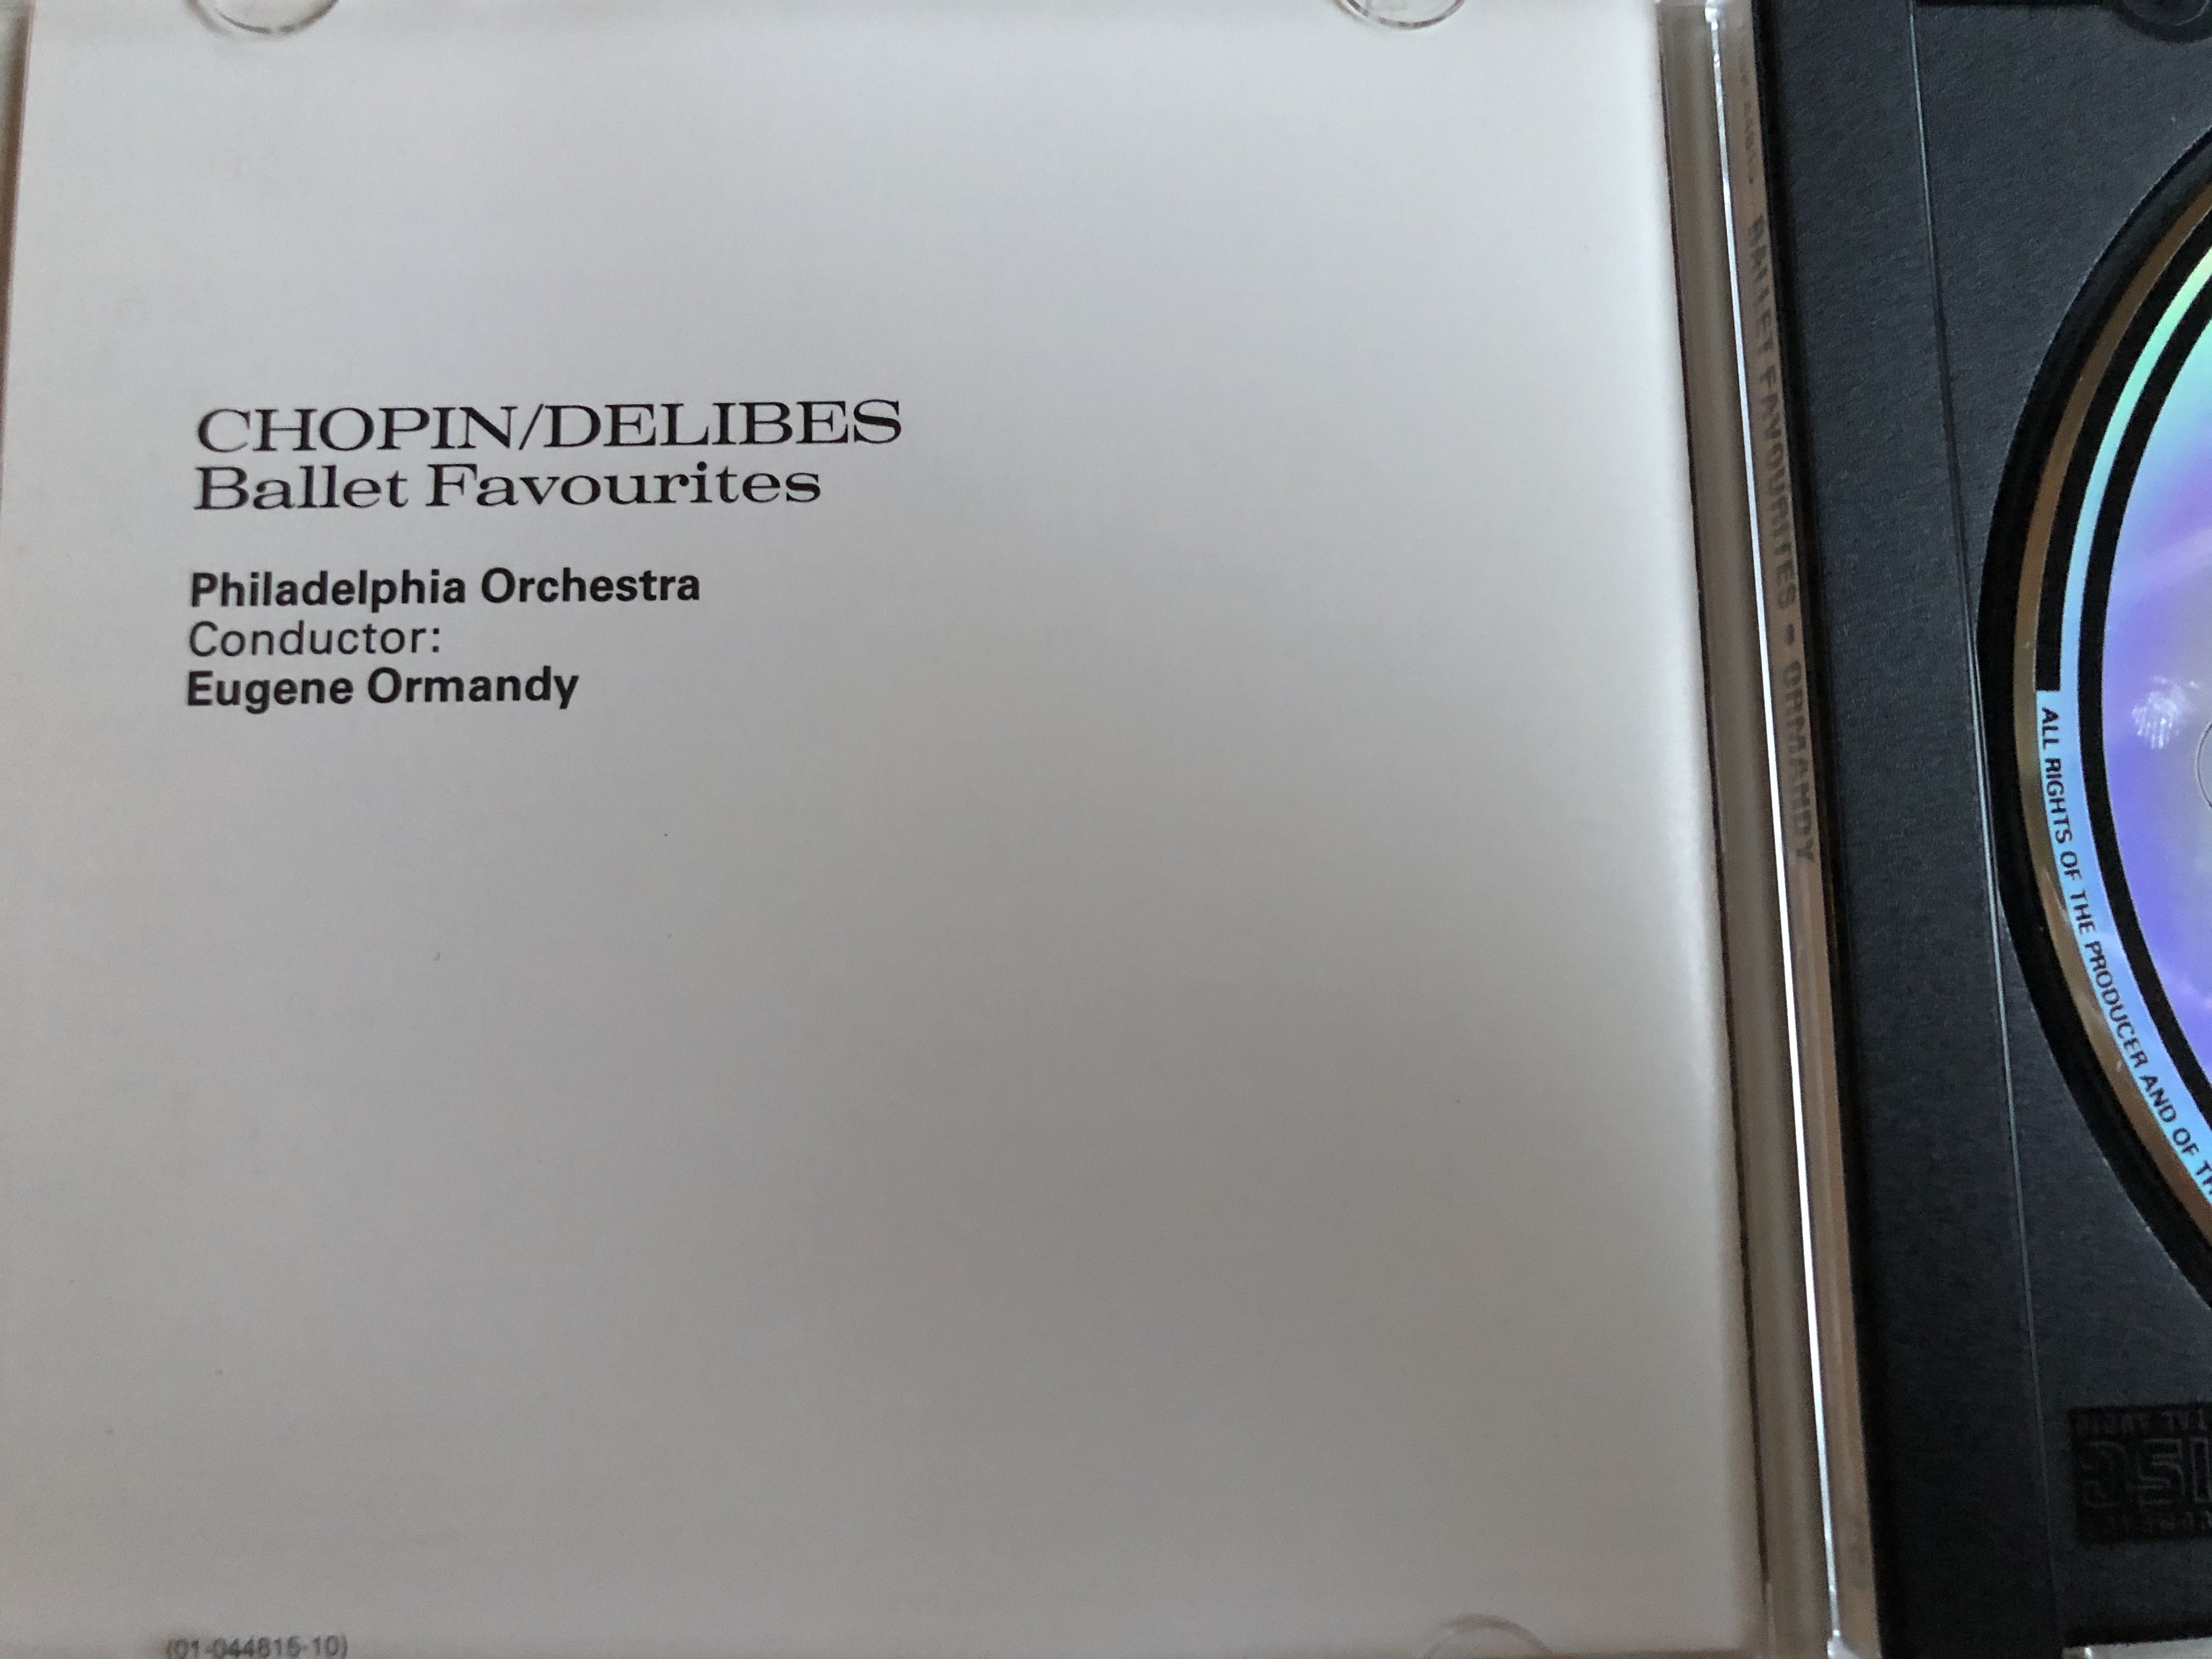 ballet-favourites-chopin-les-sylphides-delibes-sylvia-coppelia-digitally-mastered-cbs-odyssey-audio-cd-1989-stereo-mbk-44815-3-.jpg